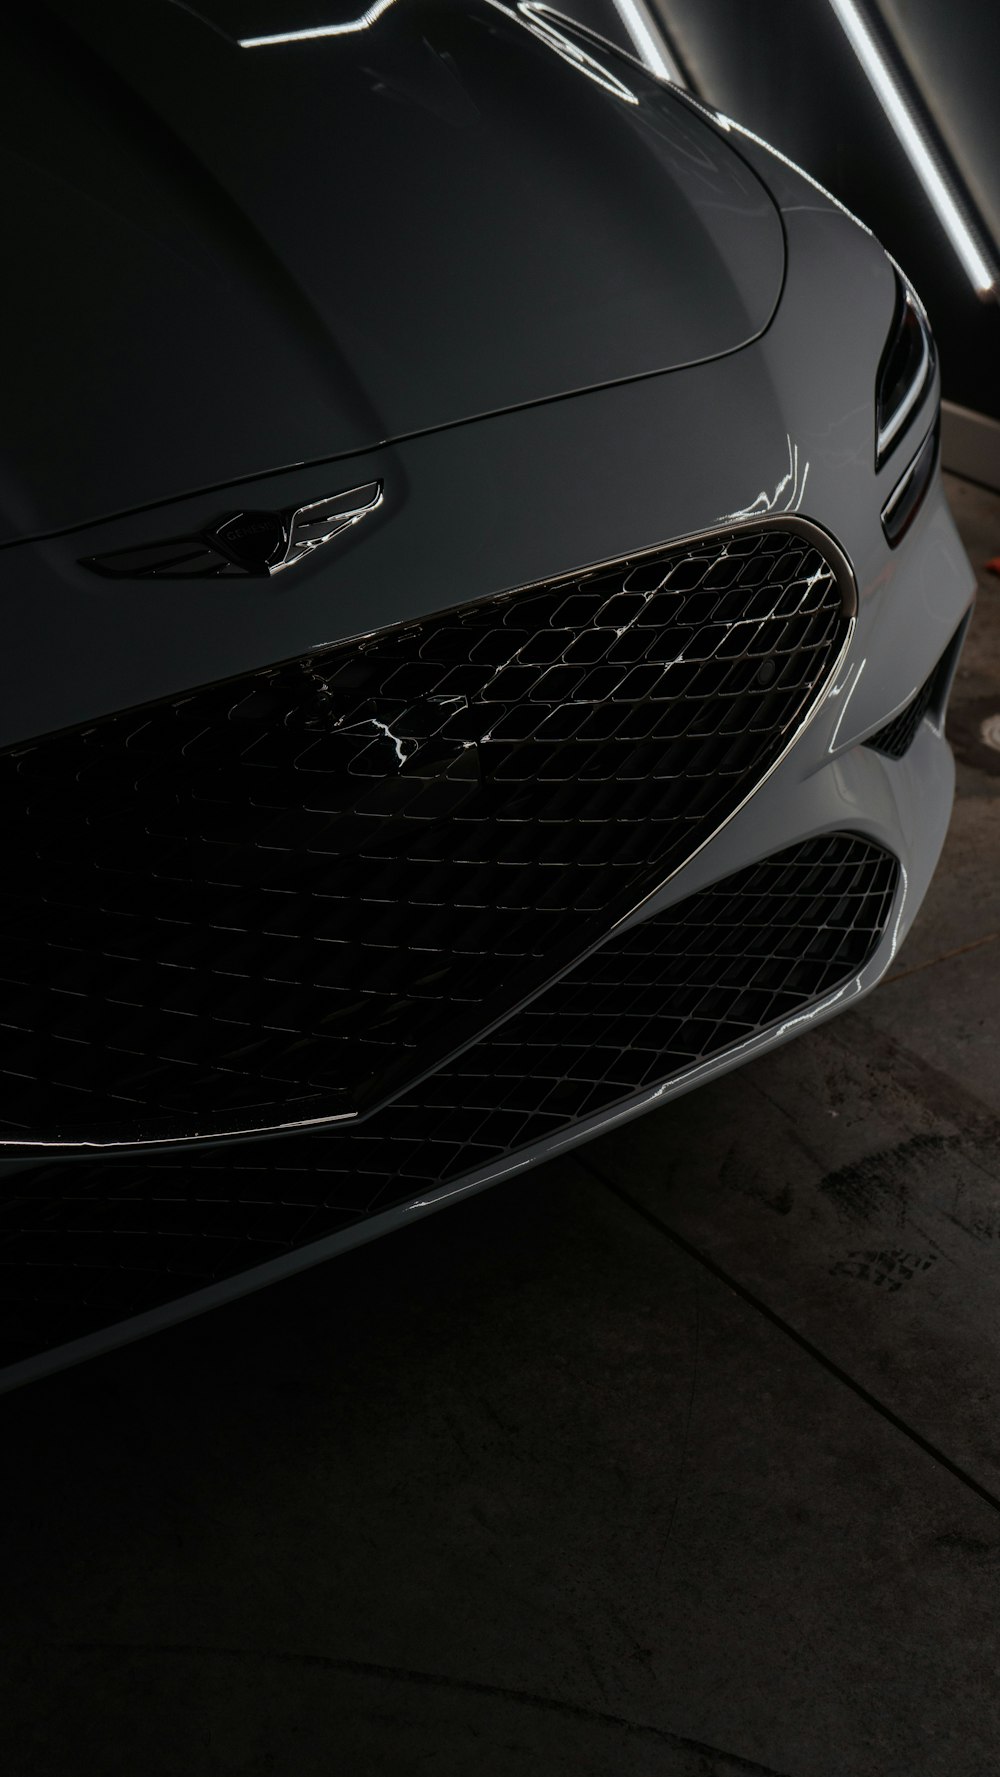 a close up of the front of a black sports car